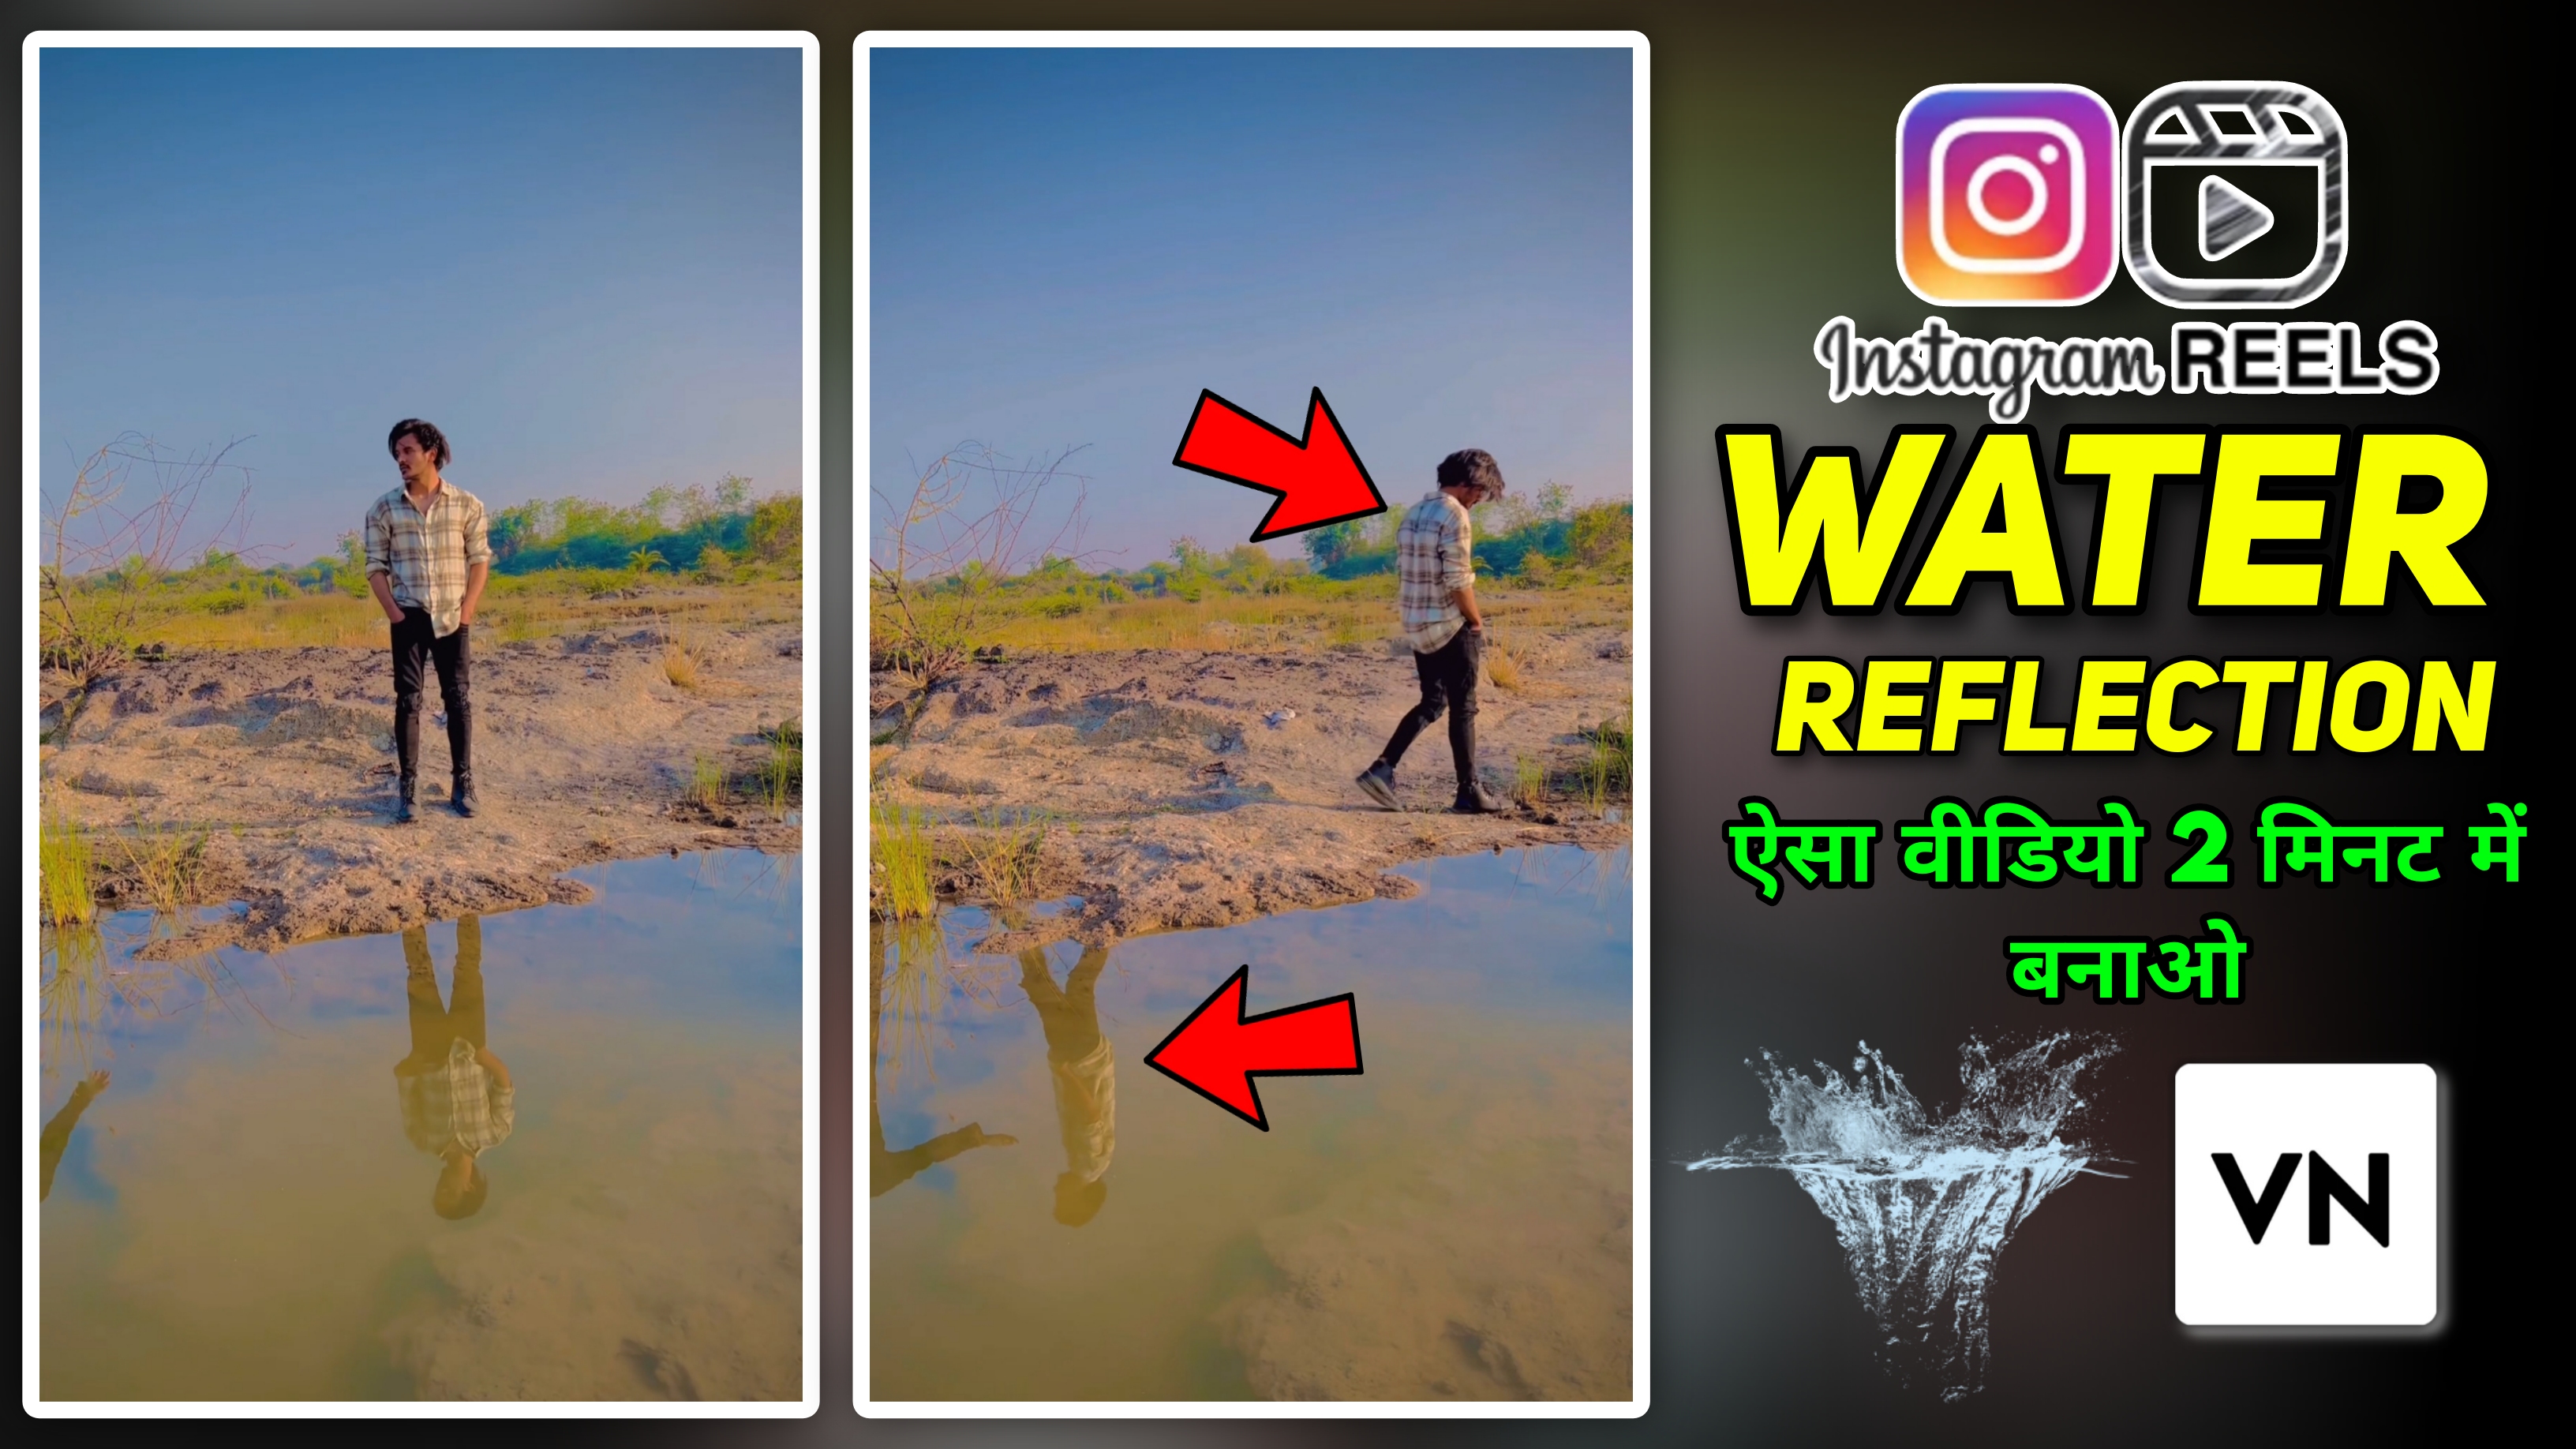 How To Make Water Reflection Video || Water Reflect Video Editing || VN Video Editing